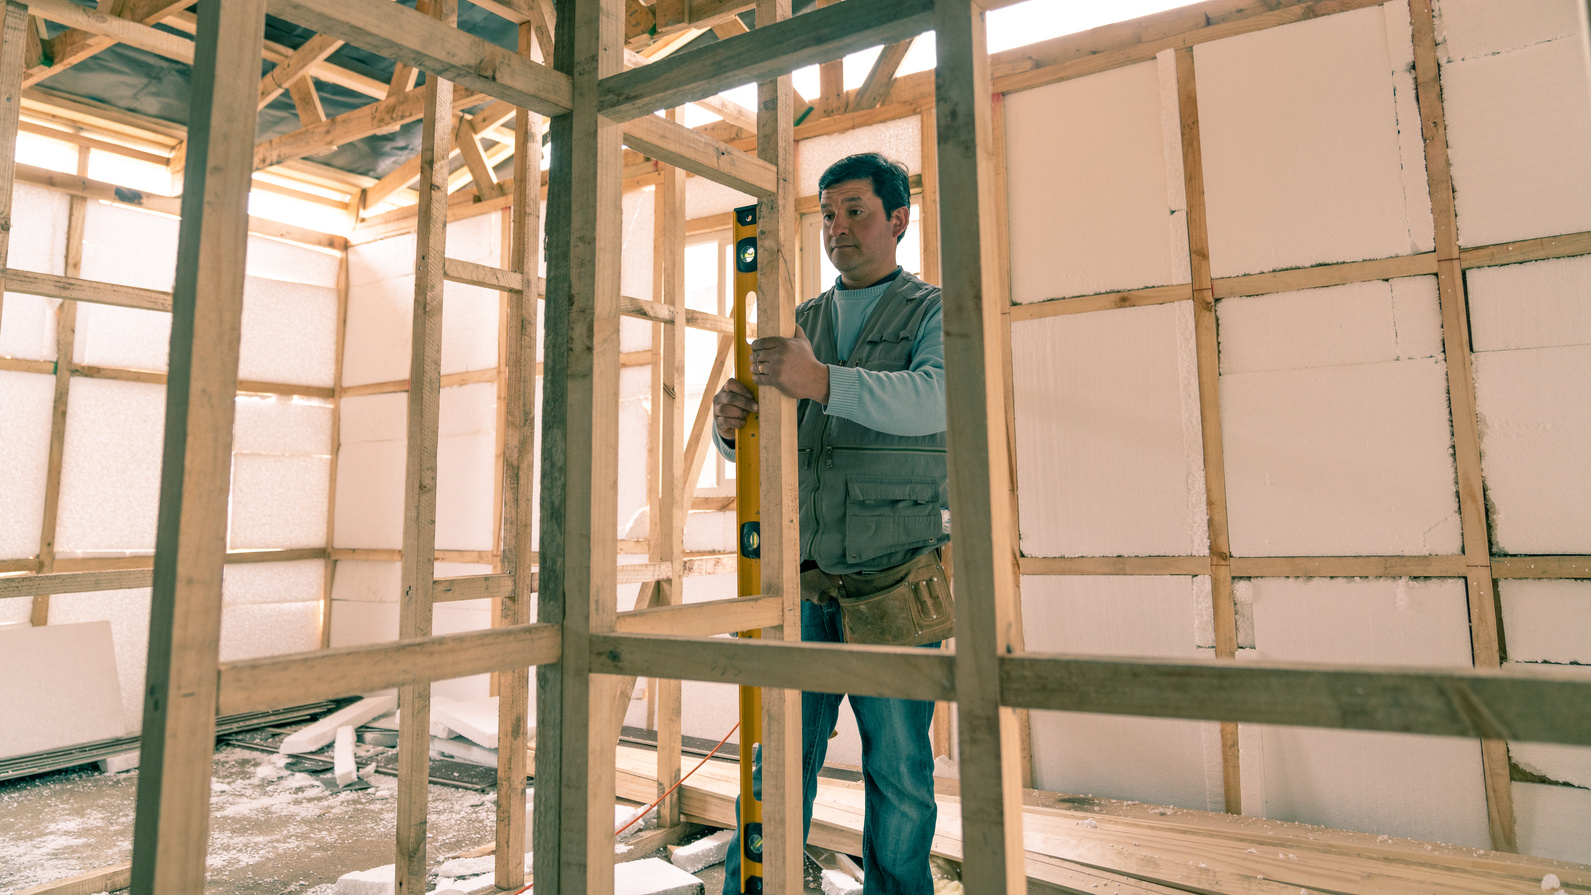 A Man Leveling a Wooden Structure